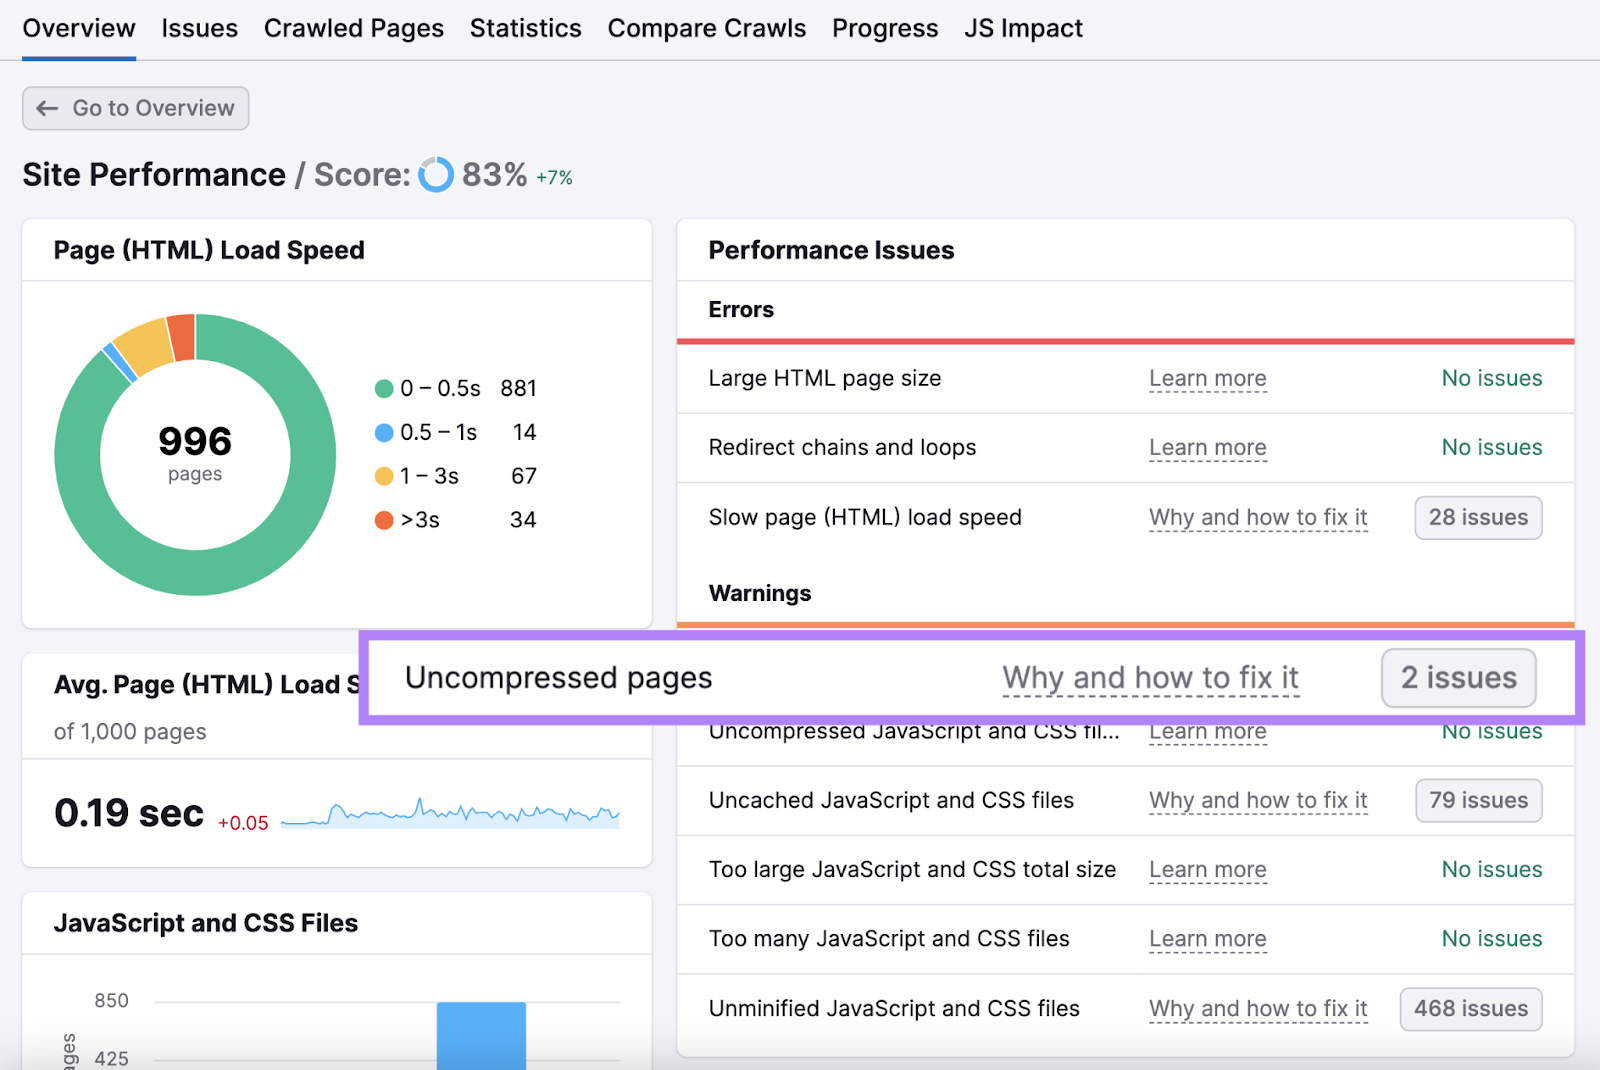 "Uncompressed pages" issue found in Site Audit highlighted